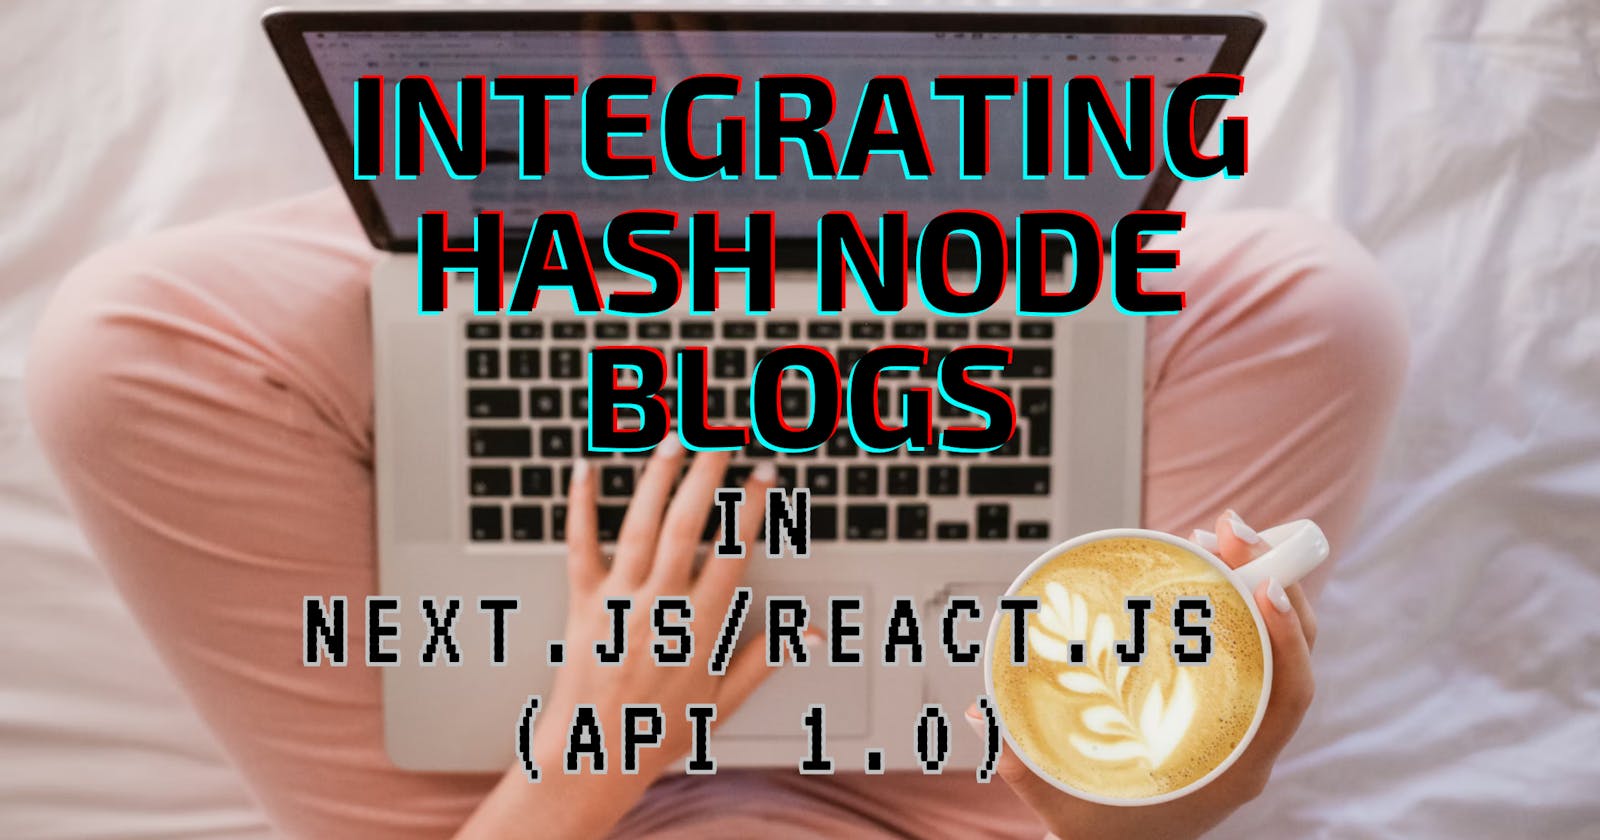 Integrating Hash Node Blogs into Your Next Js/React Js App: A Step-by-Step Guide